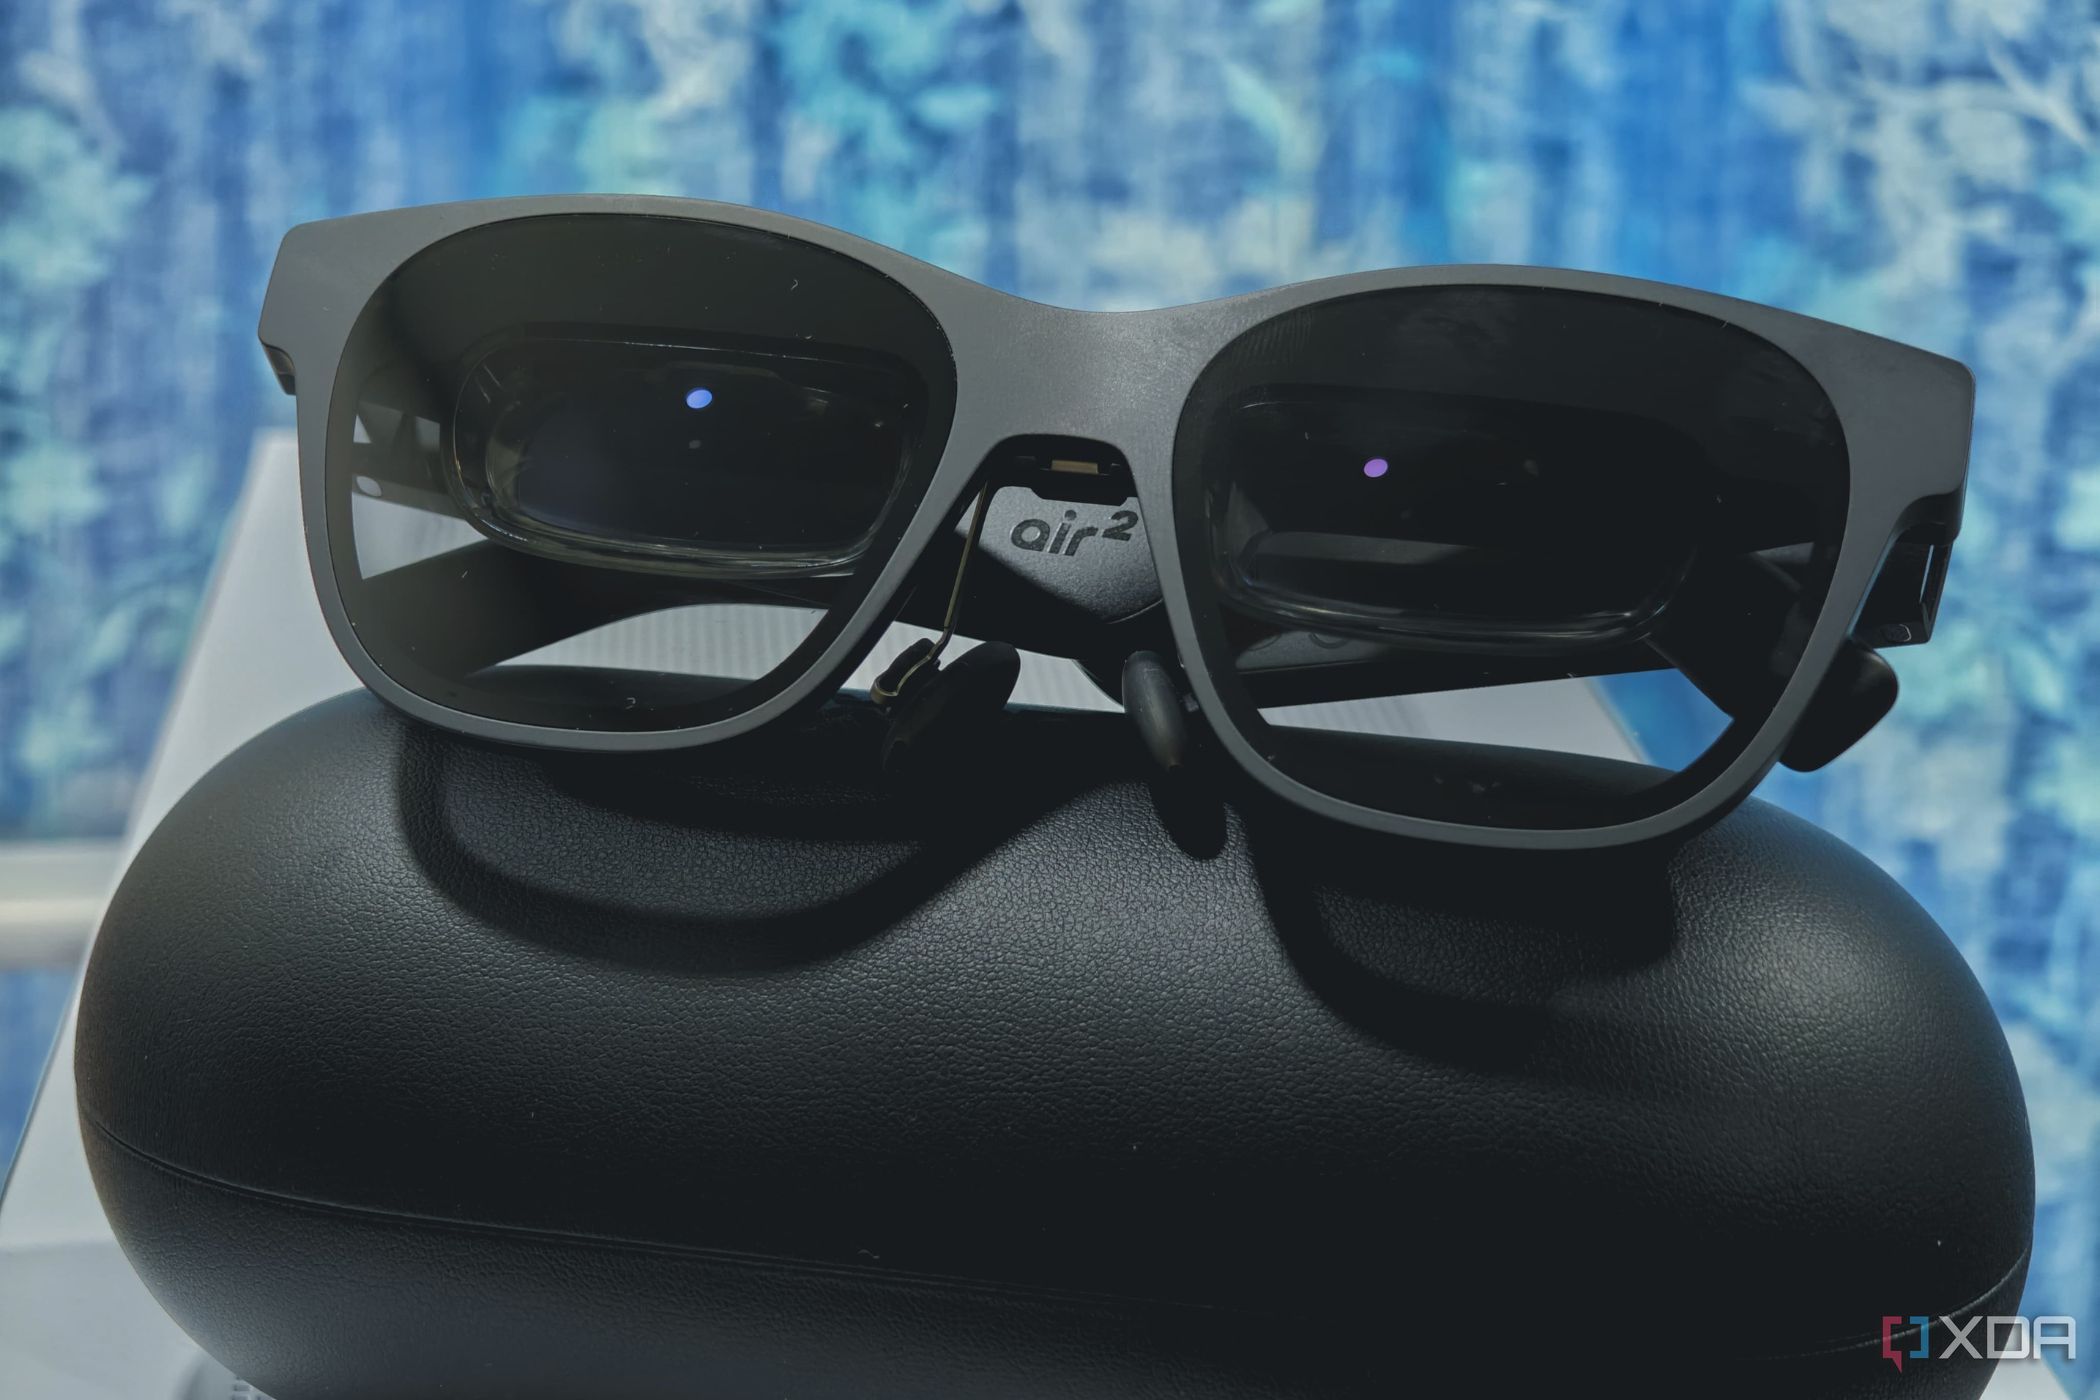 Xreal Air 2 AR glasses review: A first glimpse of spatial